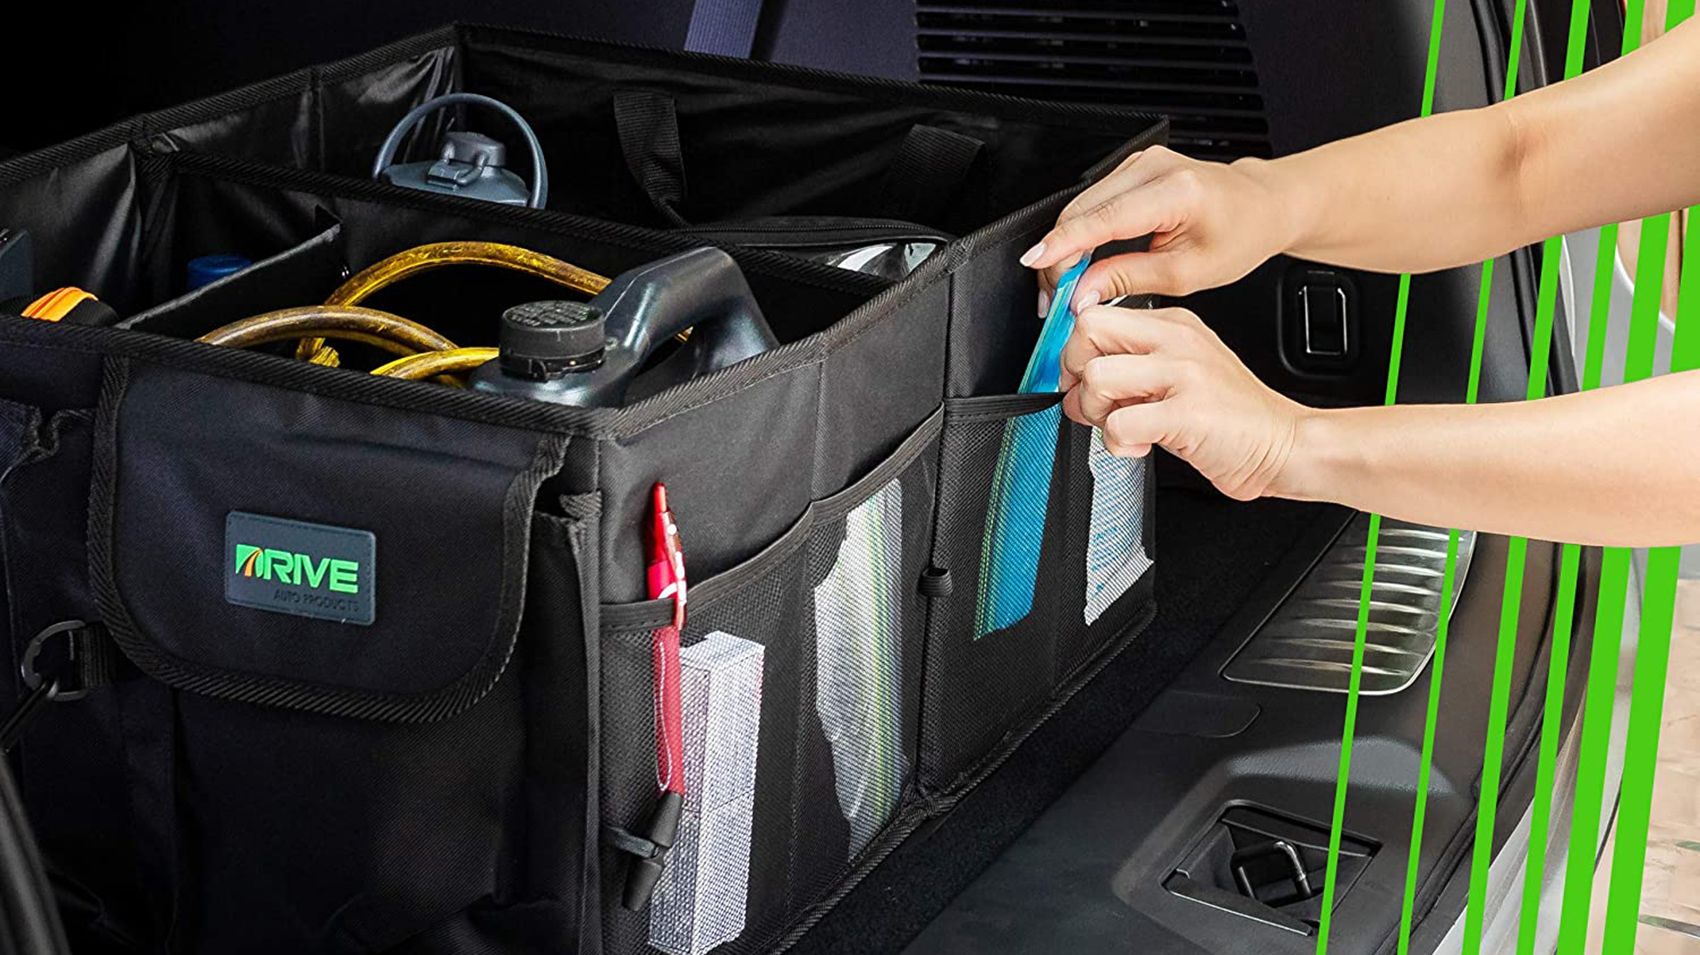 How To Keep Your Car Clean and Organized – Tricks That Can Work